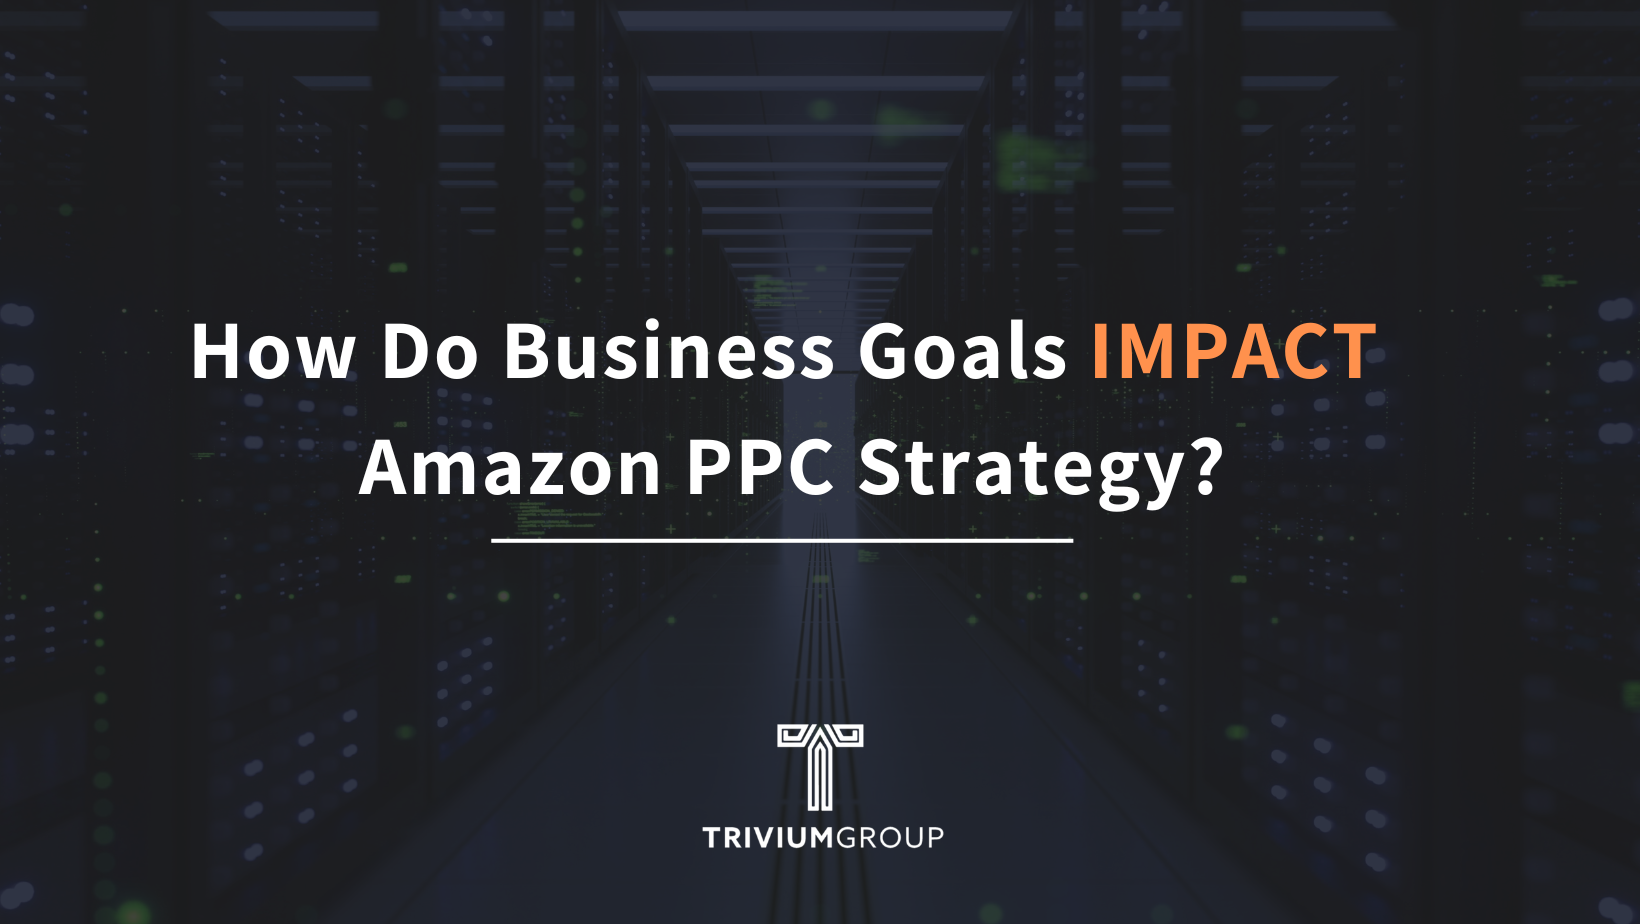 How Do Business Goals Impact Amazon PPC Strategy?